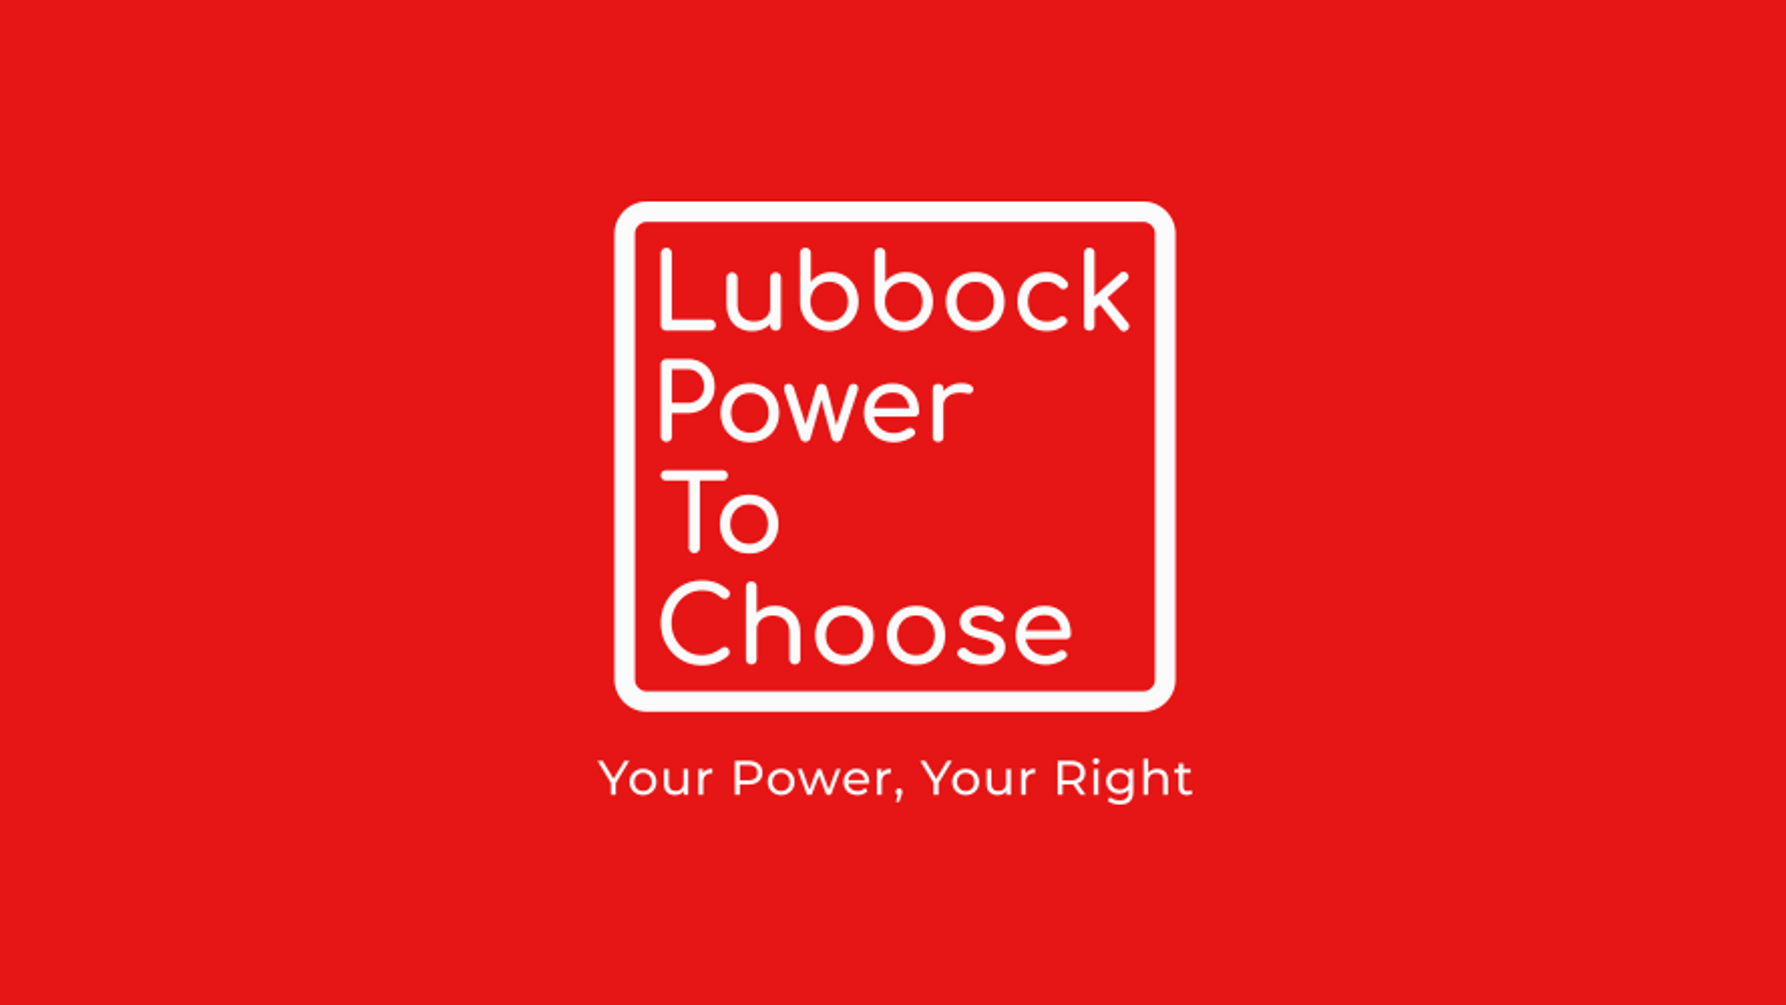 Lubbock Power To Choose: Your Power, Your Right!